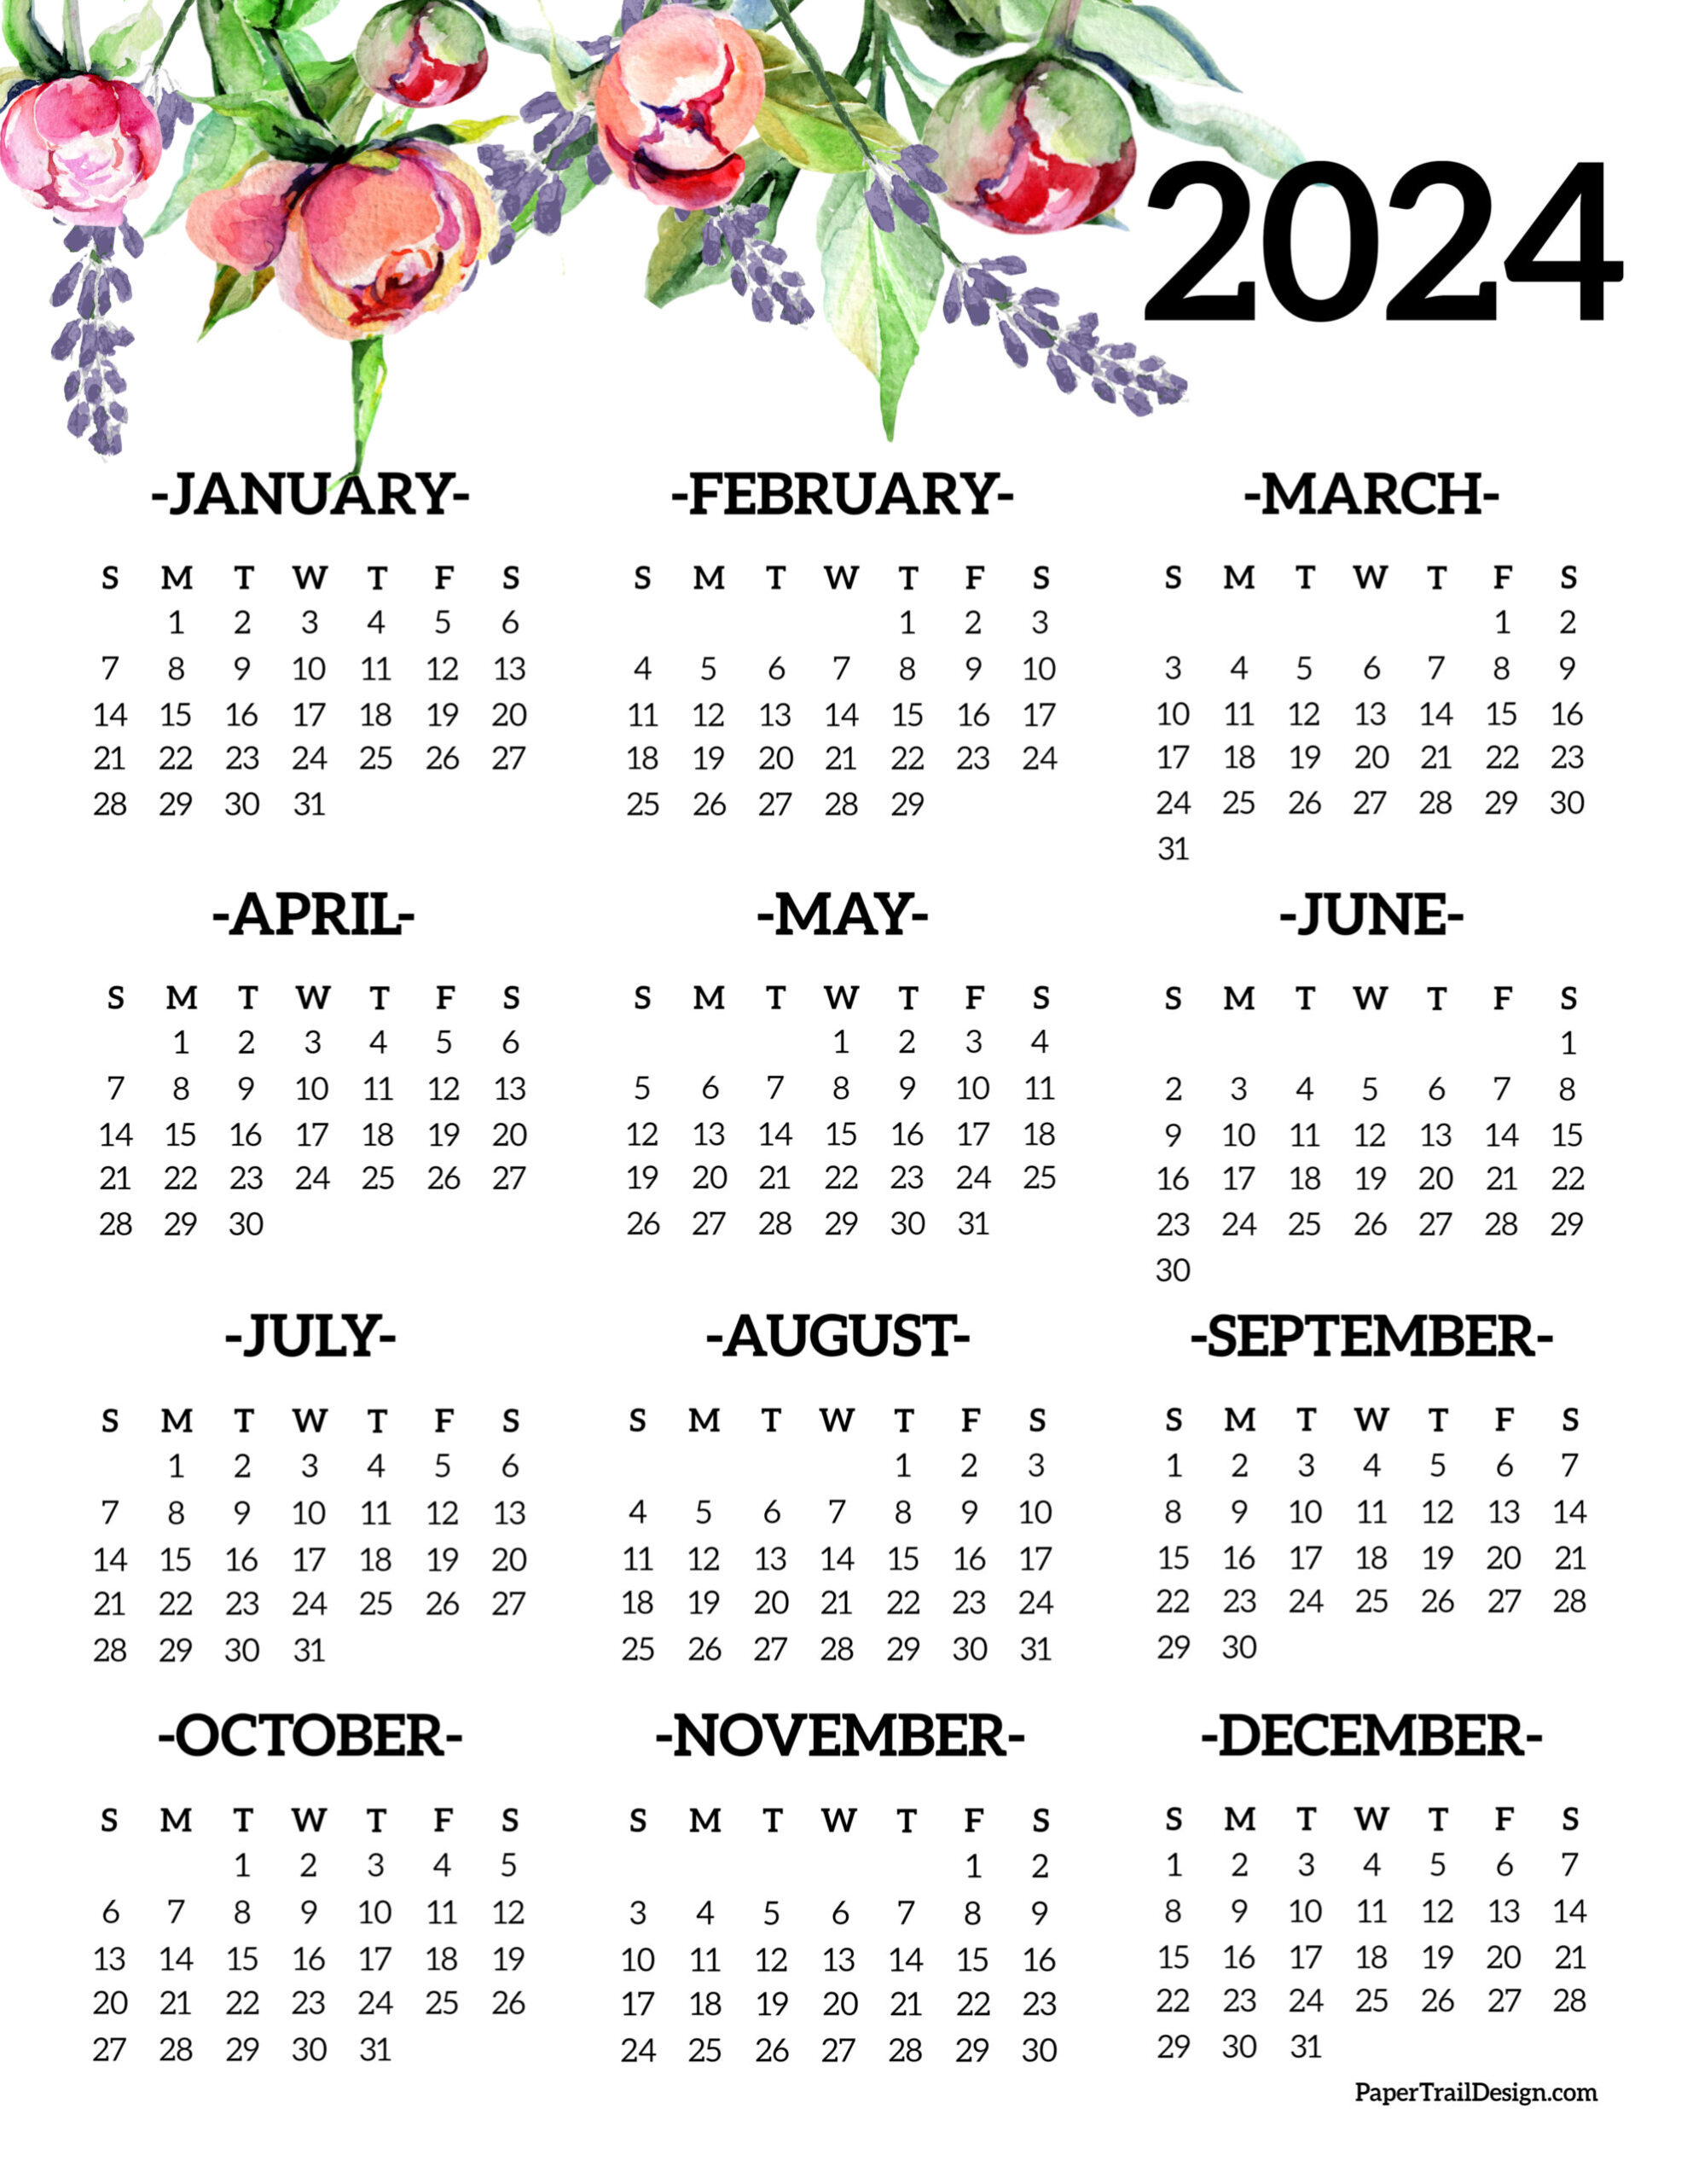 Calendar 2024 Printable One Page - Paper Trail Design for 2024 Calendar Printable 1 Page